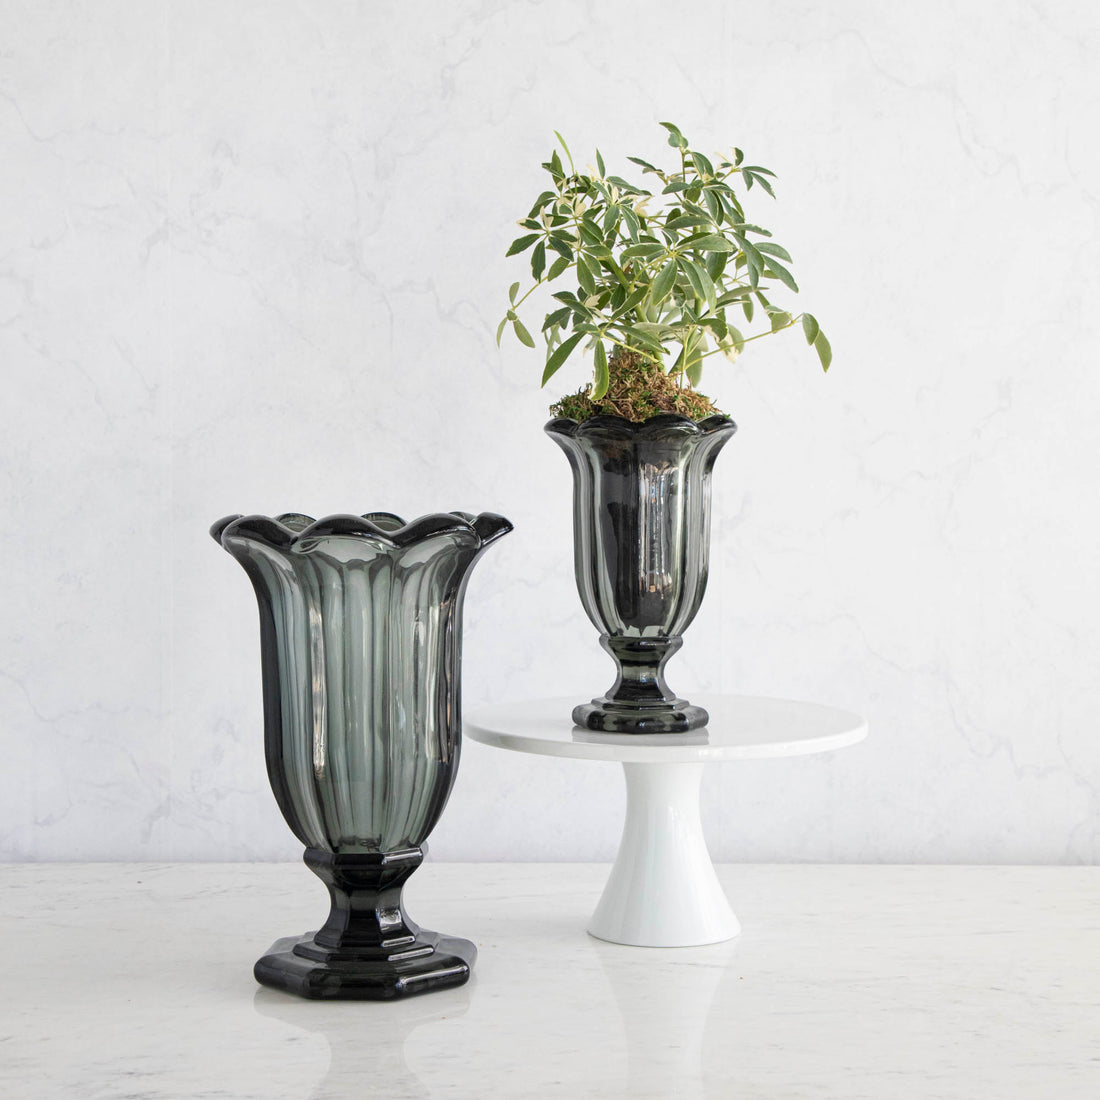 An elegant black Smoke Glass Fluted Vase with a plant beside a decorative empty floral vase on a white pedestal against a marble background. (Brand Name: Shi Shi)